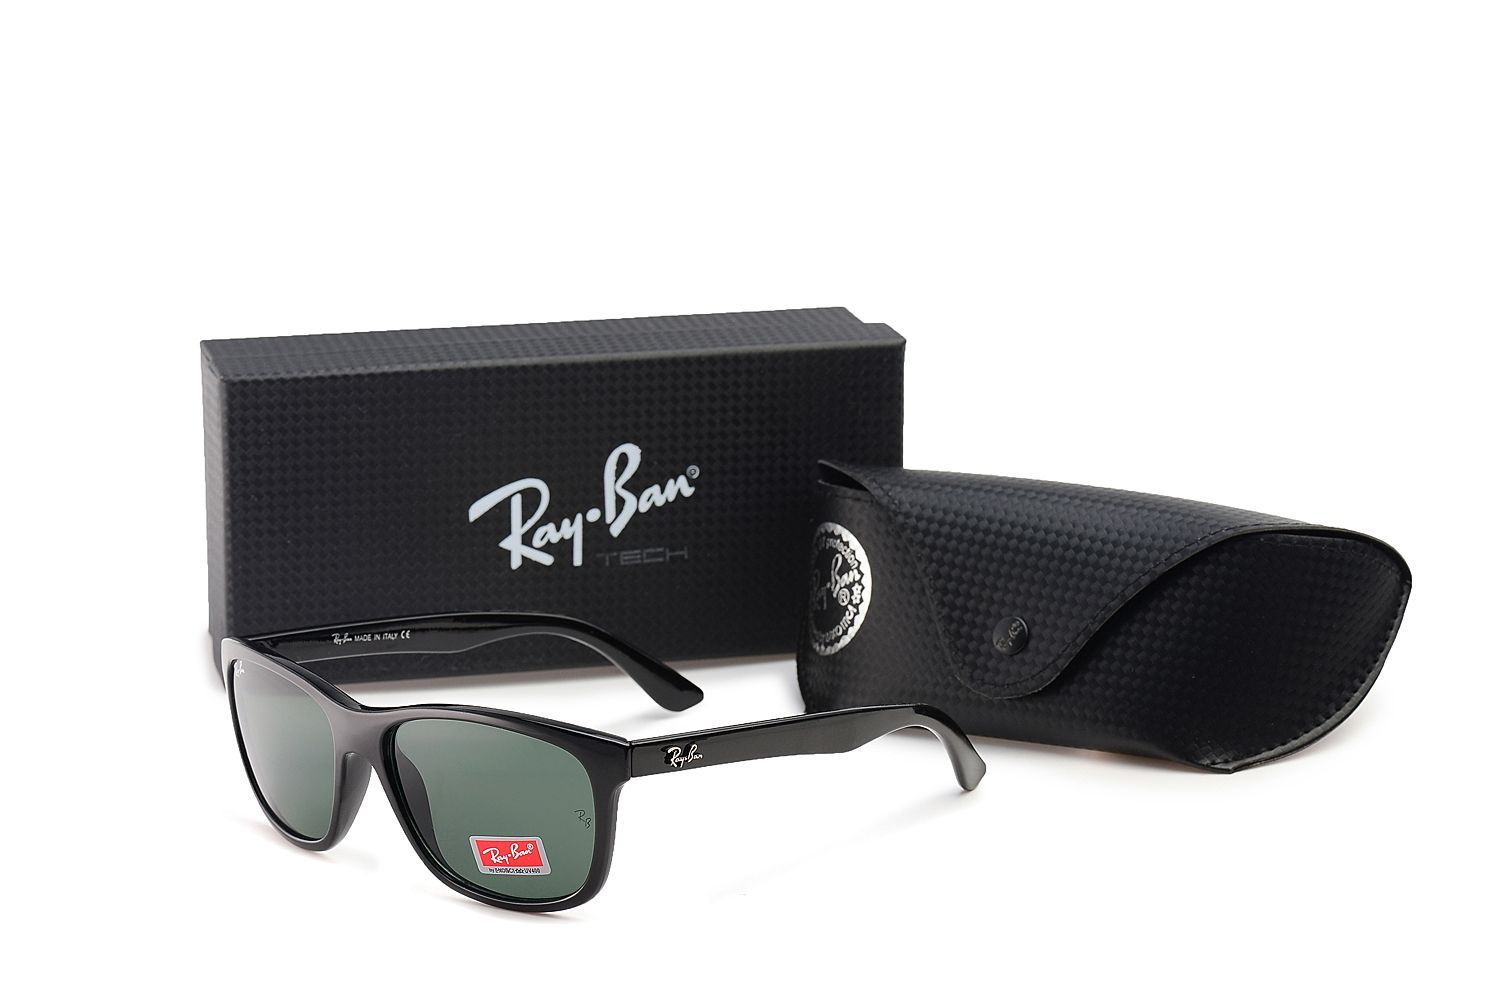 Original Rayban sunglasses for only $30,just got one from here,highly recommend